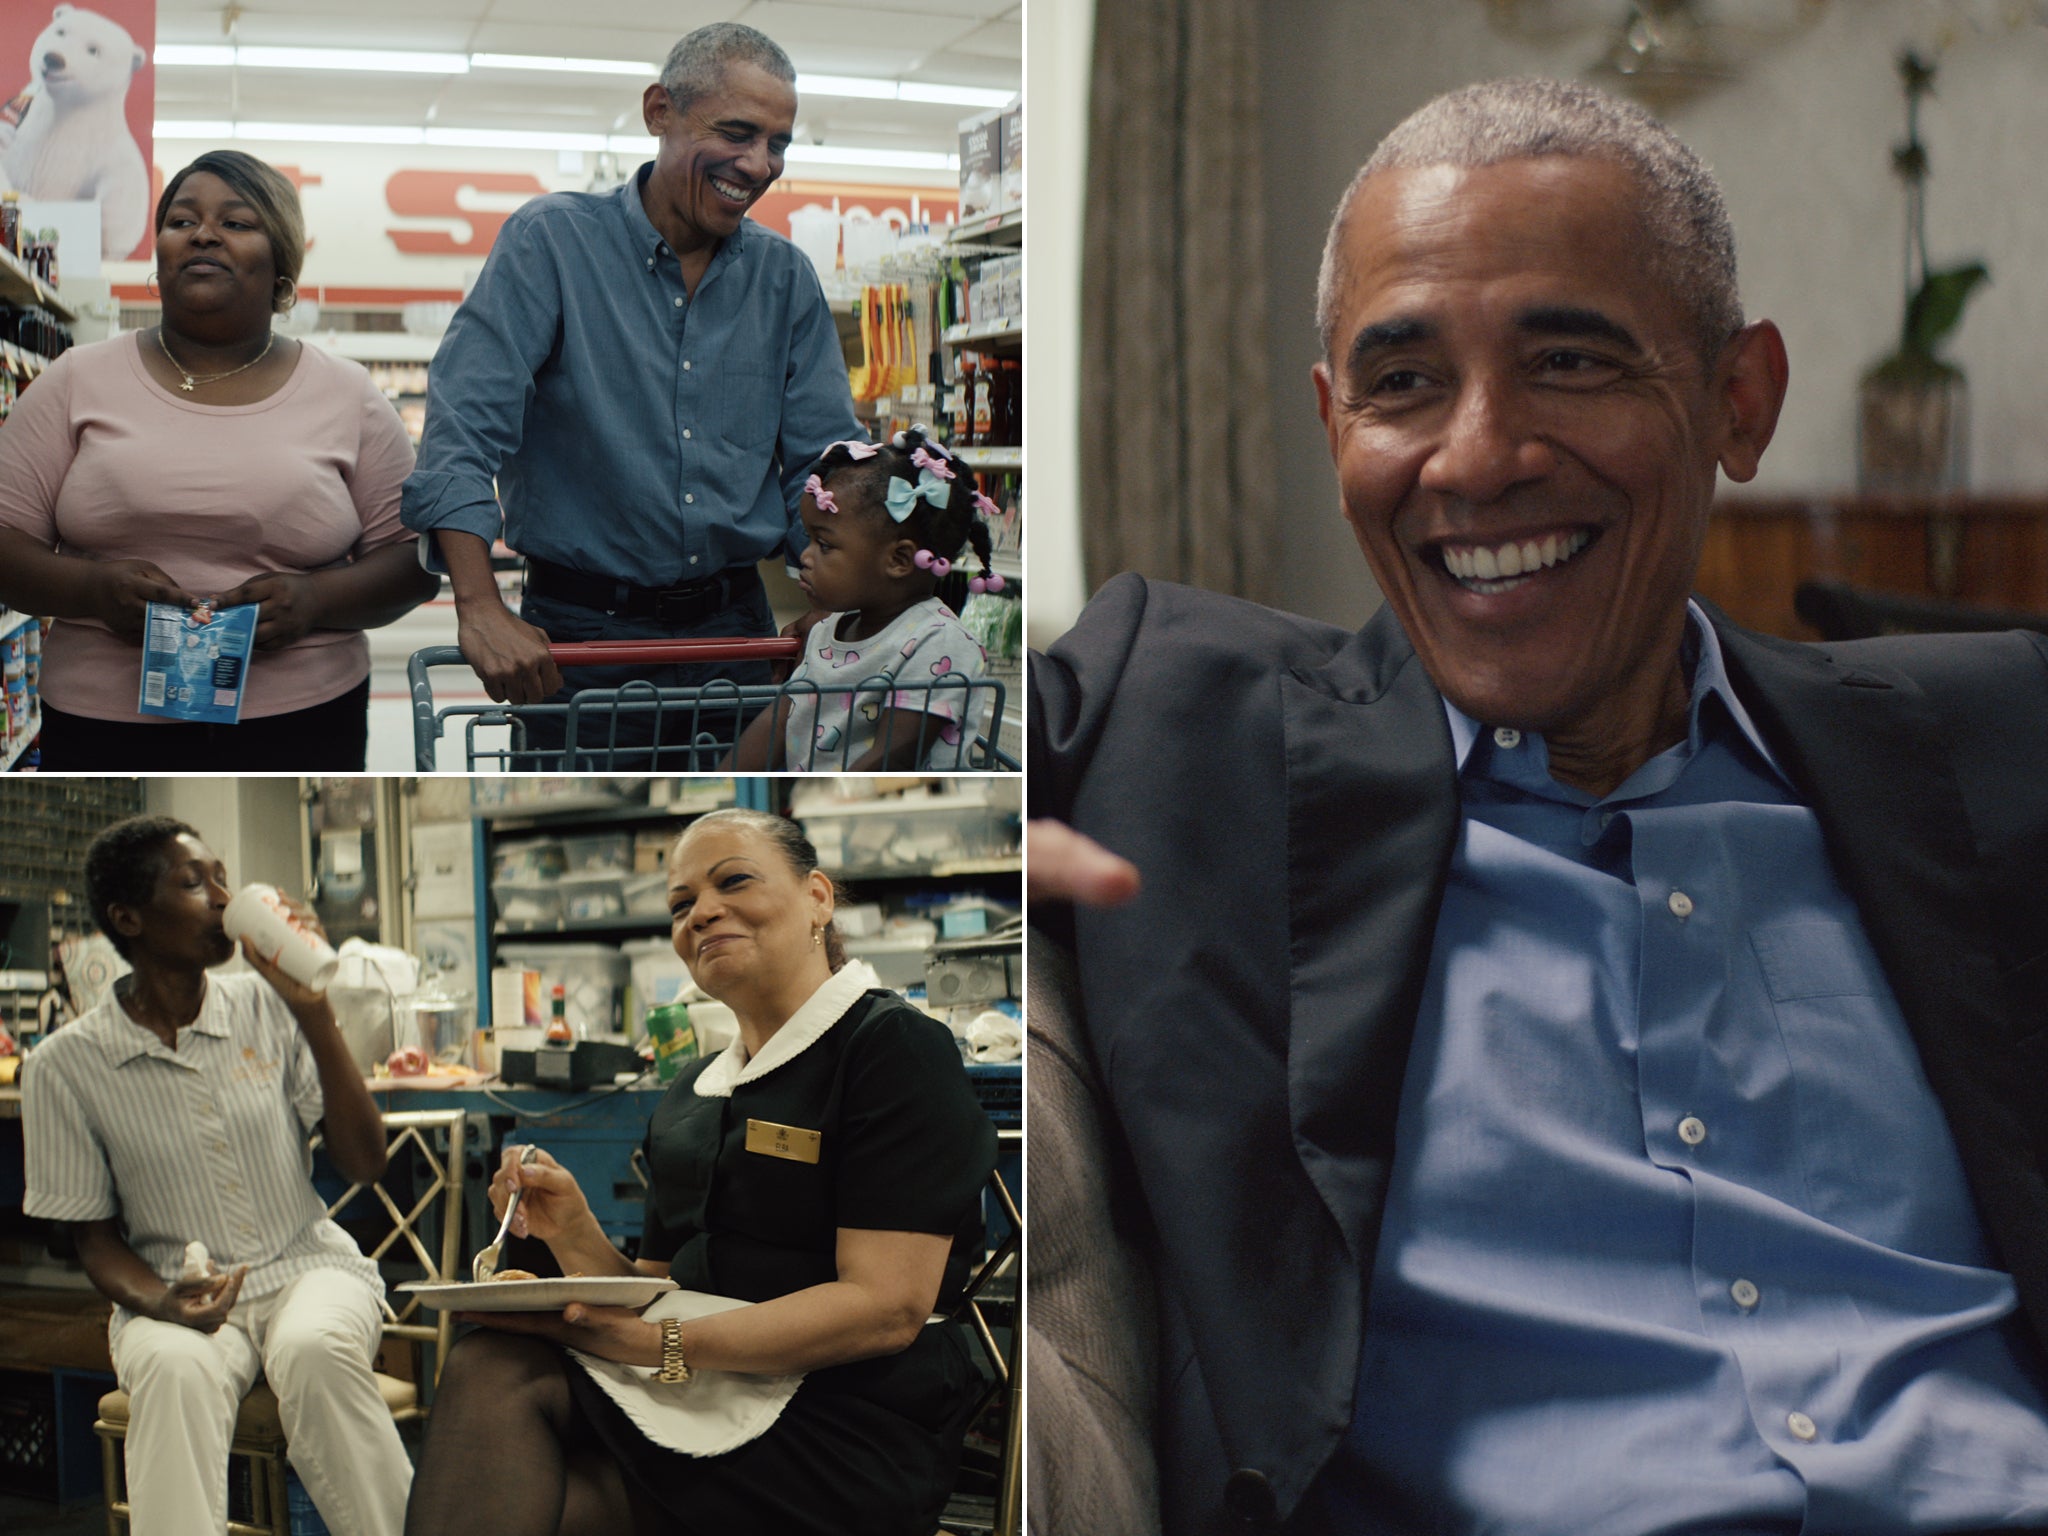 Top left: Barack Obama and documentary participant Randi Williams shop for groceries together; bottom left: Elba Guzmán, a housekeeper at the Pierre hotel, works as a housekeeper; right: Barack Obama is an executive producer on the documentary series, which he also narrates and stars in